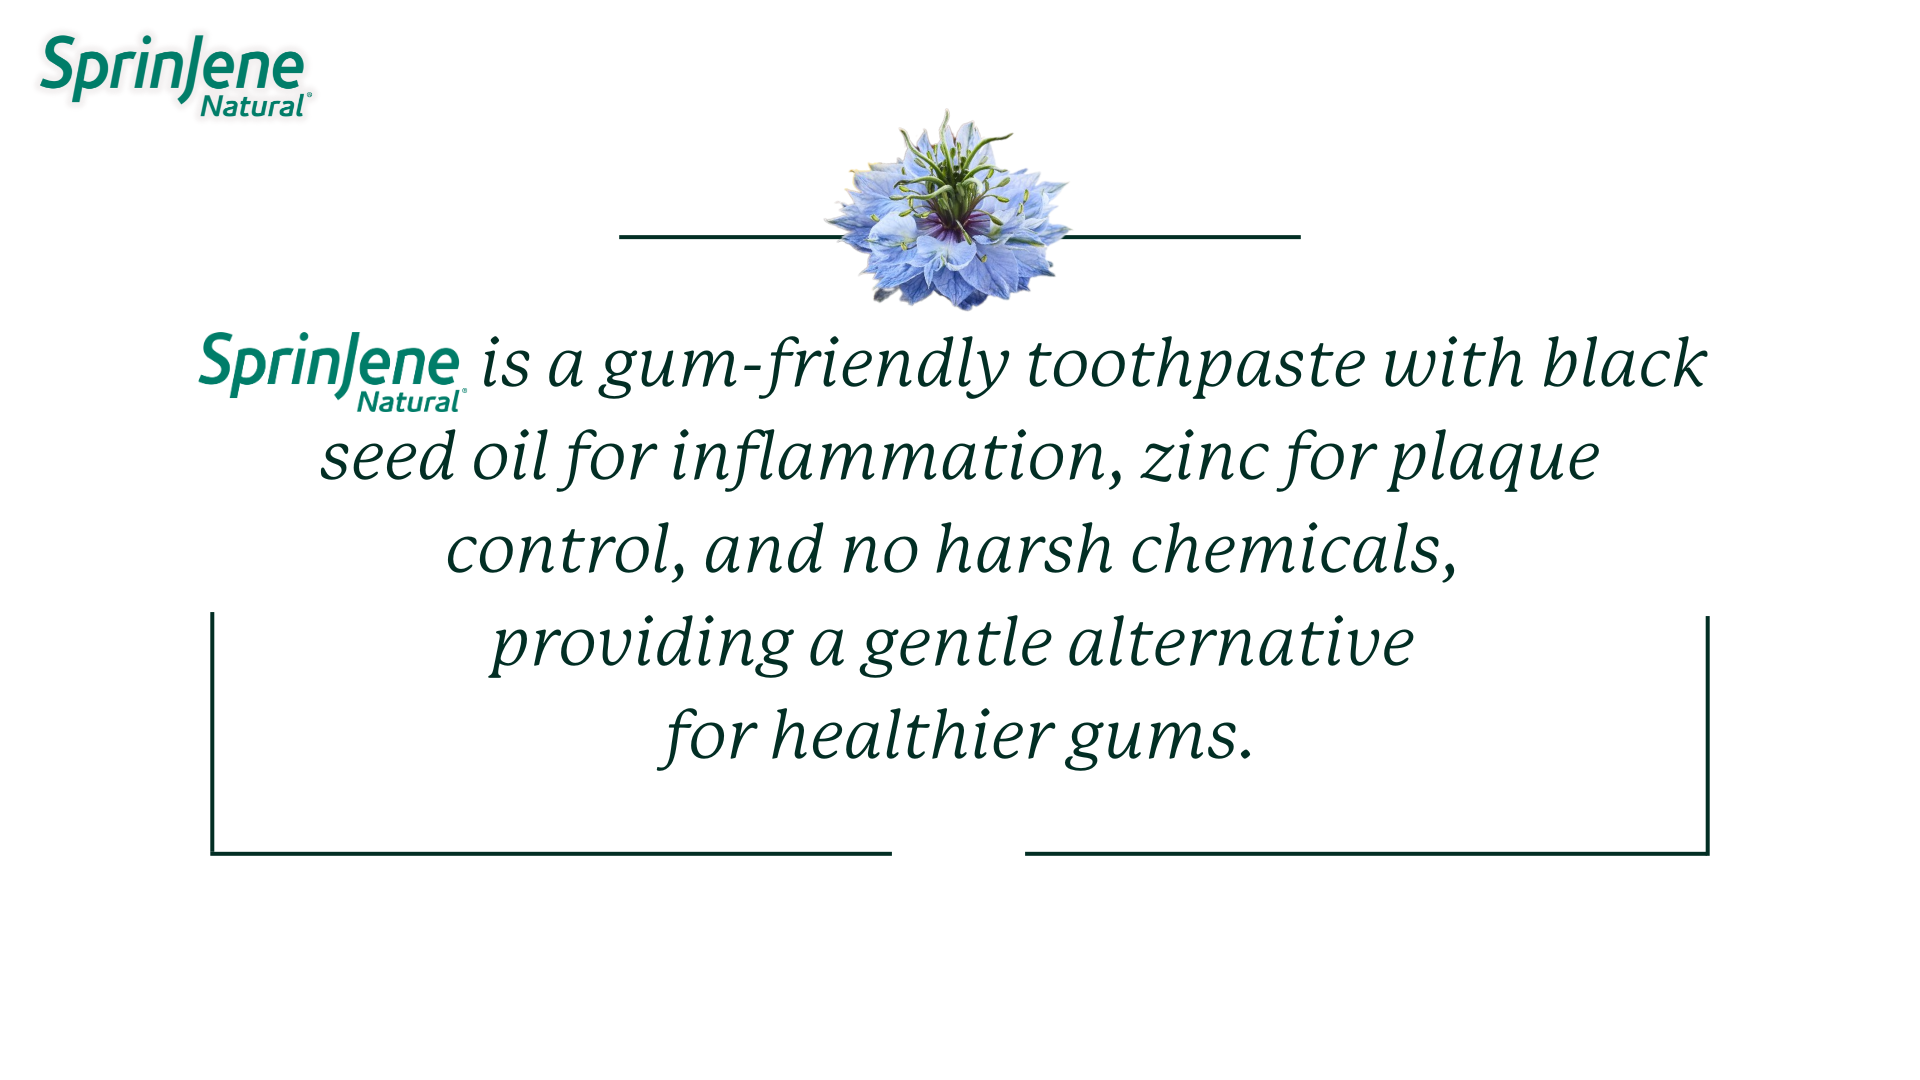 SprinJene Natural Toothpaste is a gum-friendly toothpaste with black seed oil for inflammation, zinc for plaque control, and no harsh chemicals, providing a gentle alternative for healthier gums.